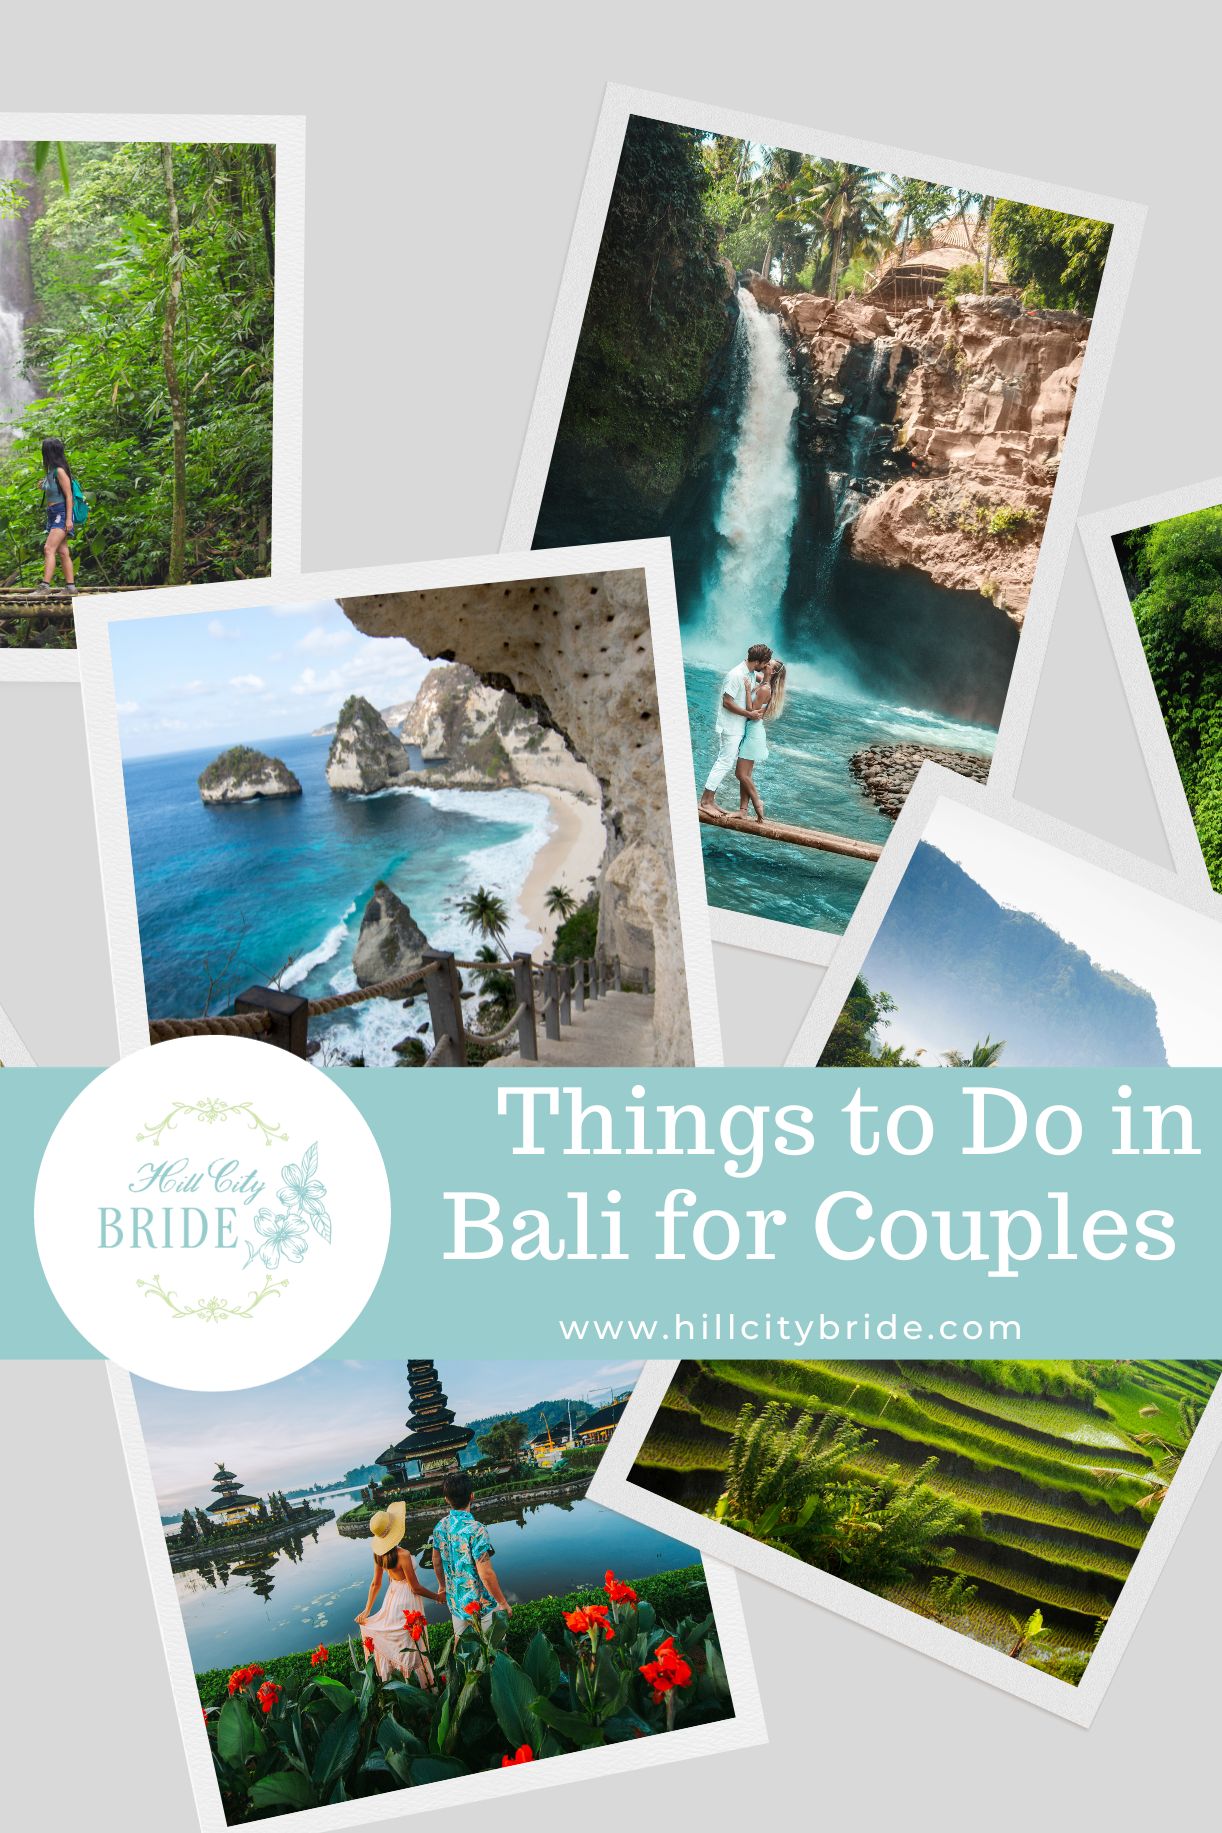 Things to Do in Bali for Couples